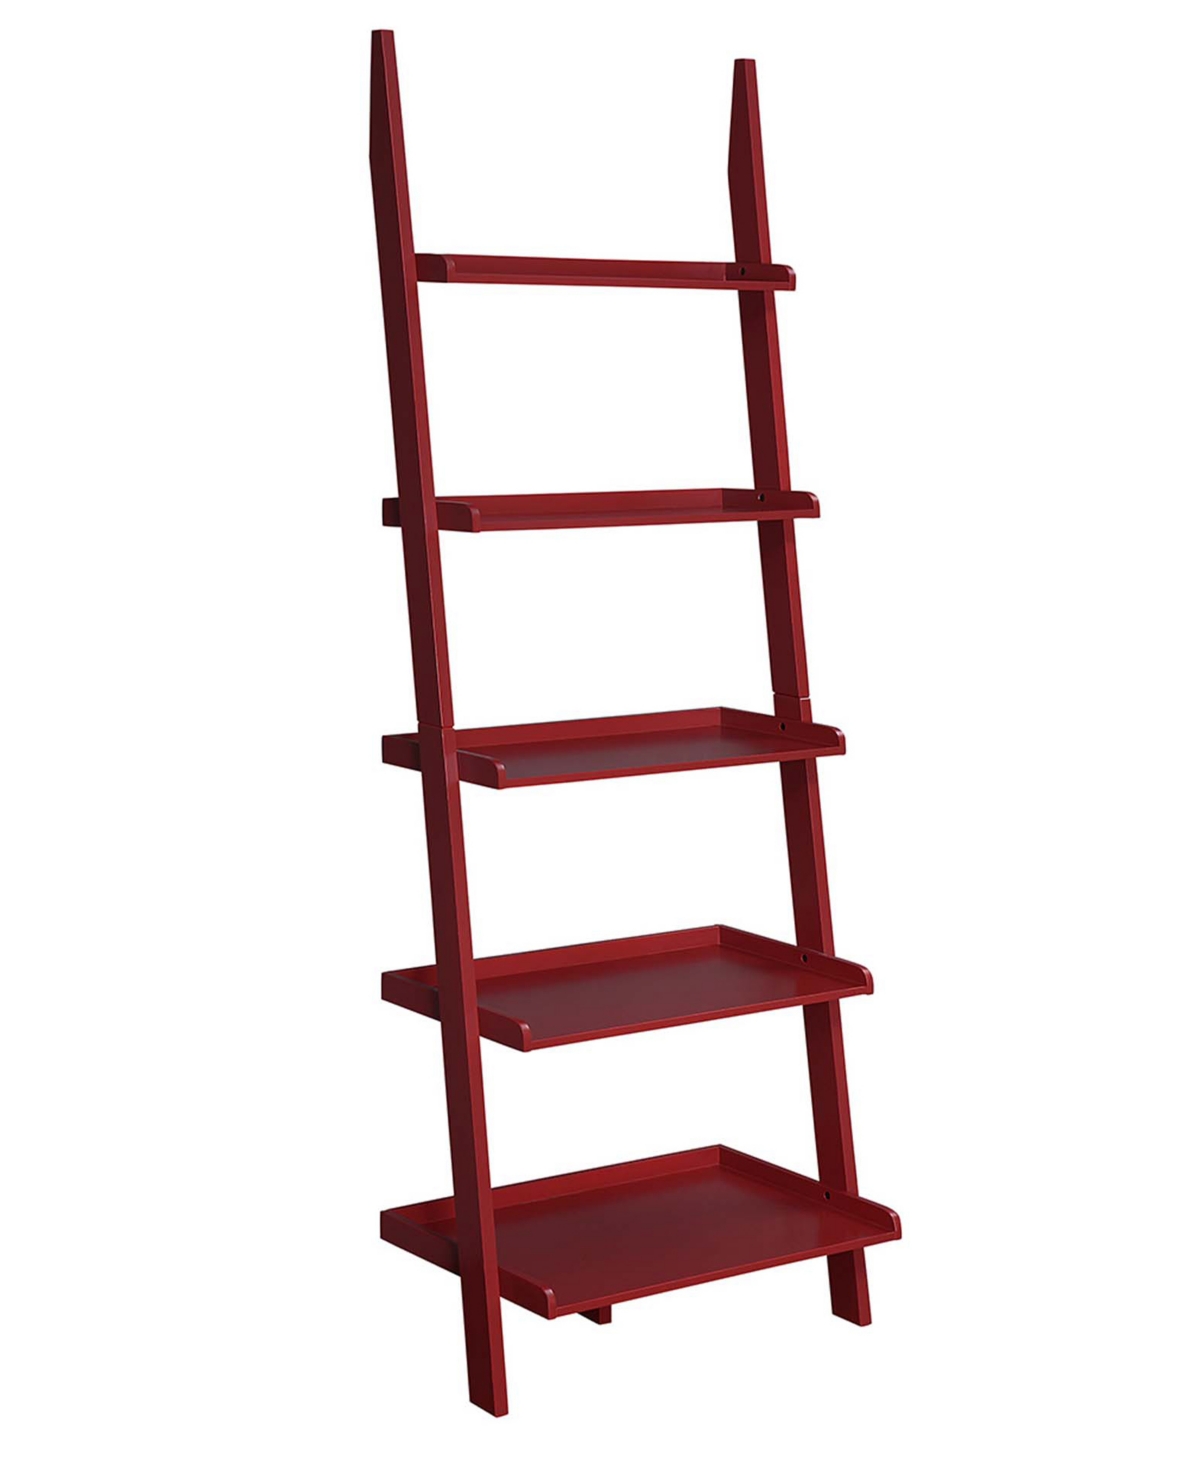 Convenience Concepts 25" Solid Pine American Heritage Bookshelf Ladder In Cranberry Red